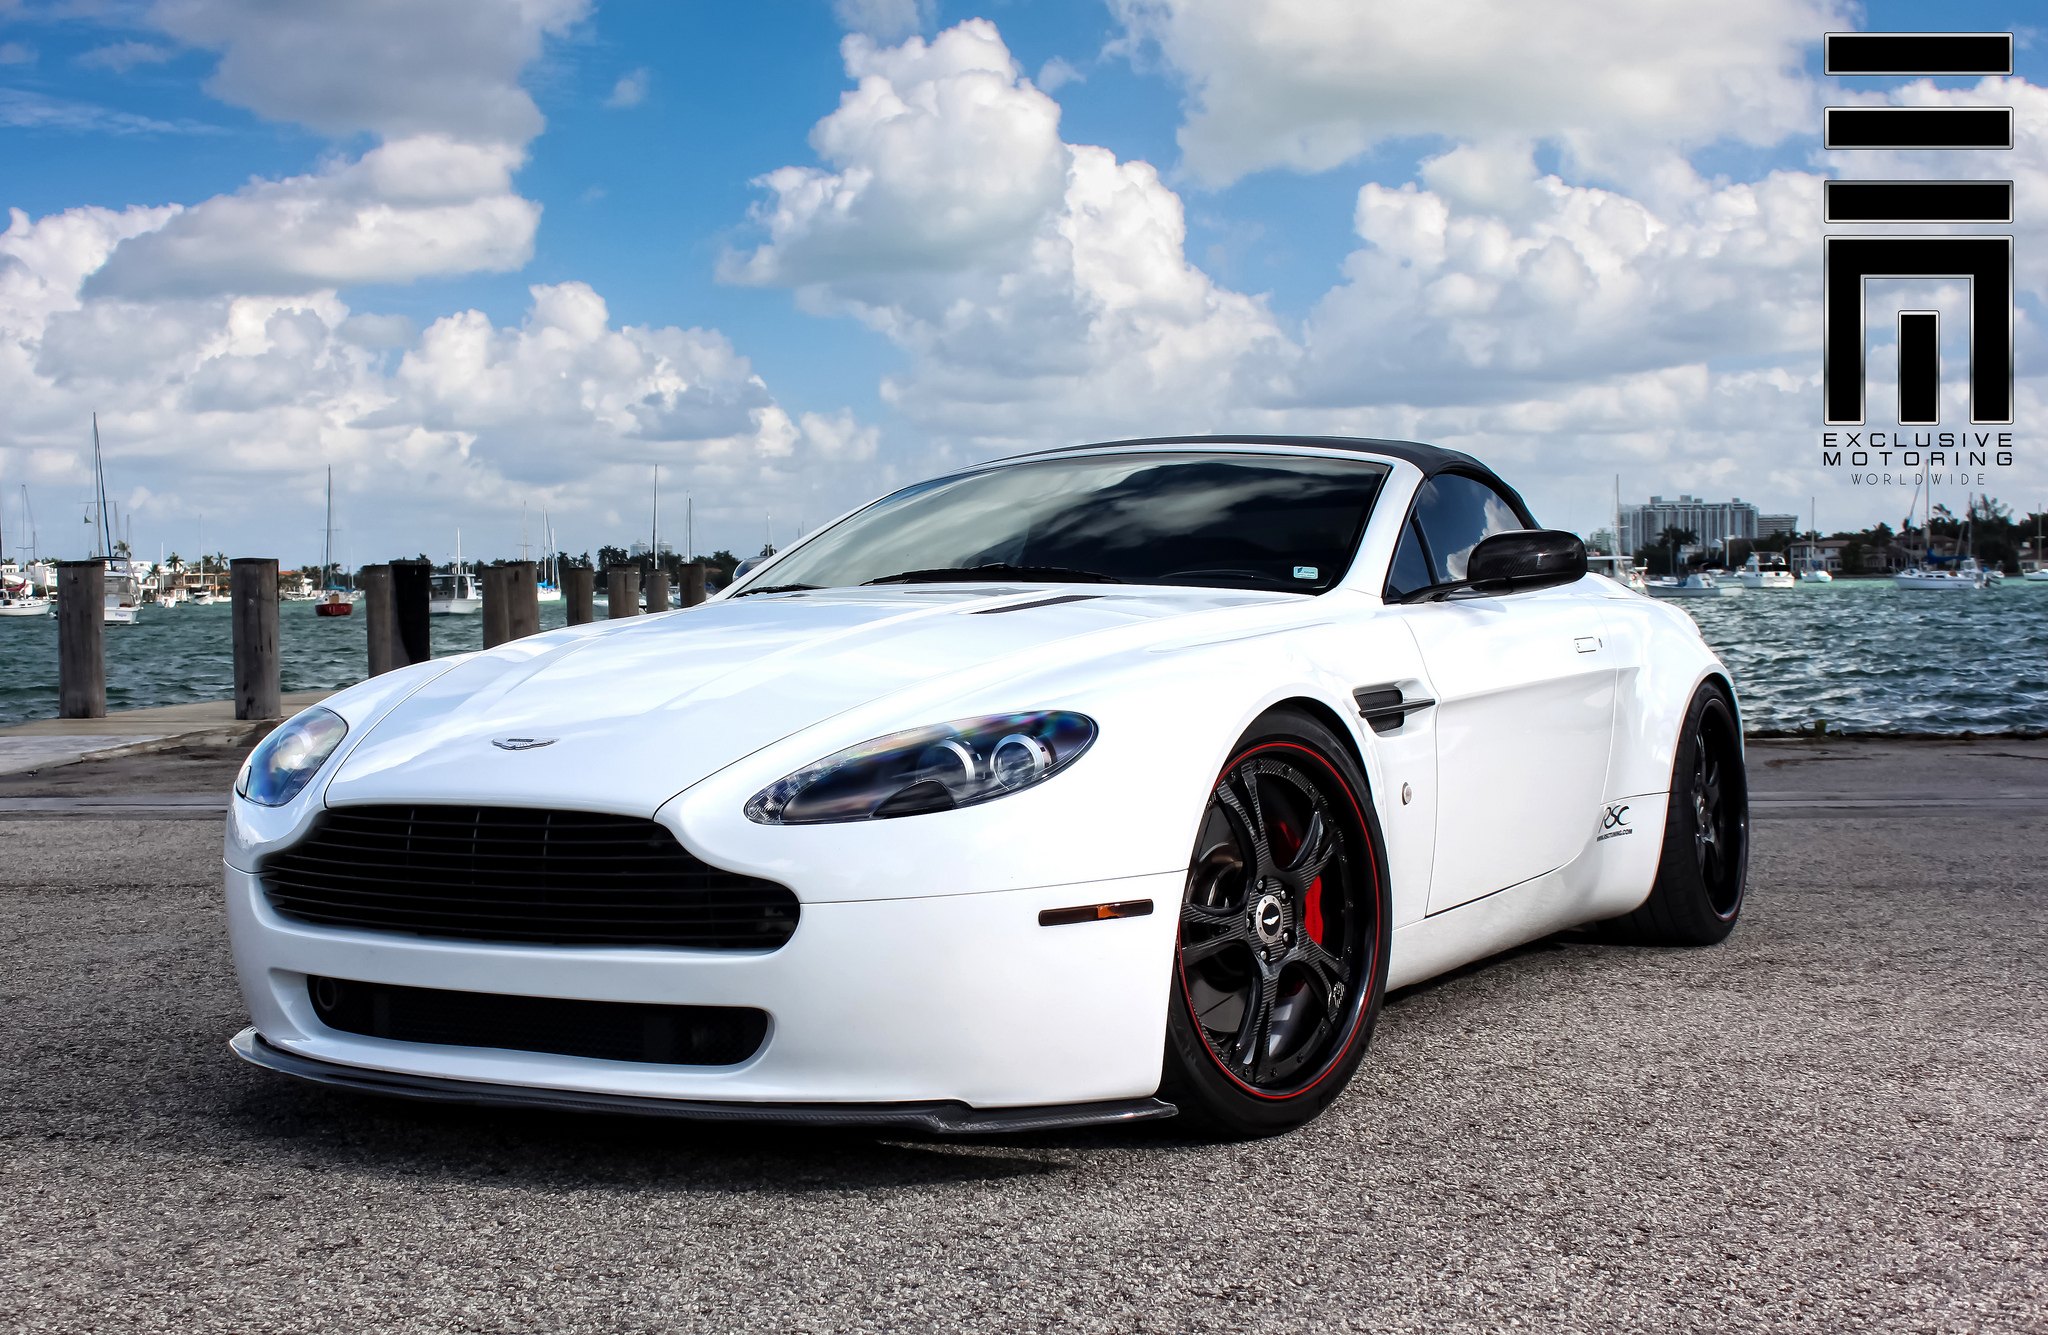 Snow White Aston Martin Vantage on contrasting wheels  - Photo by Exclusive Motoring